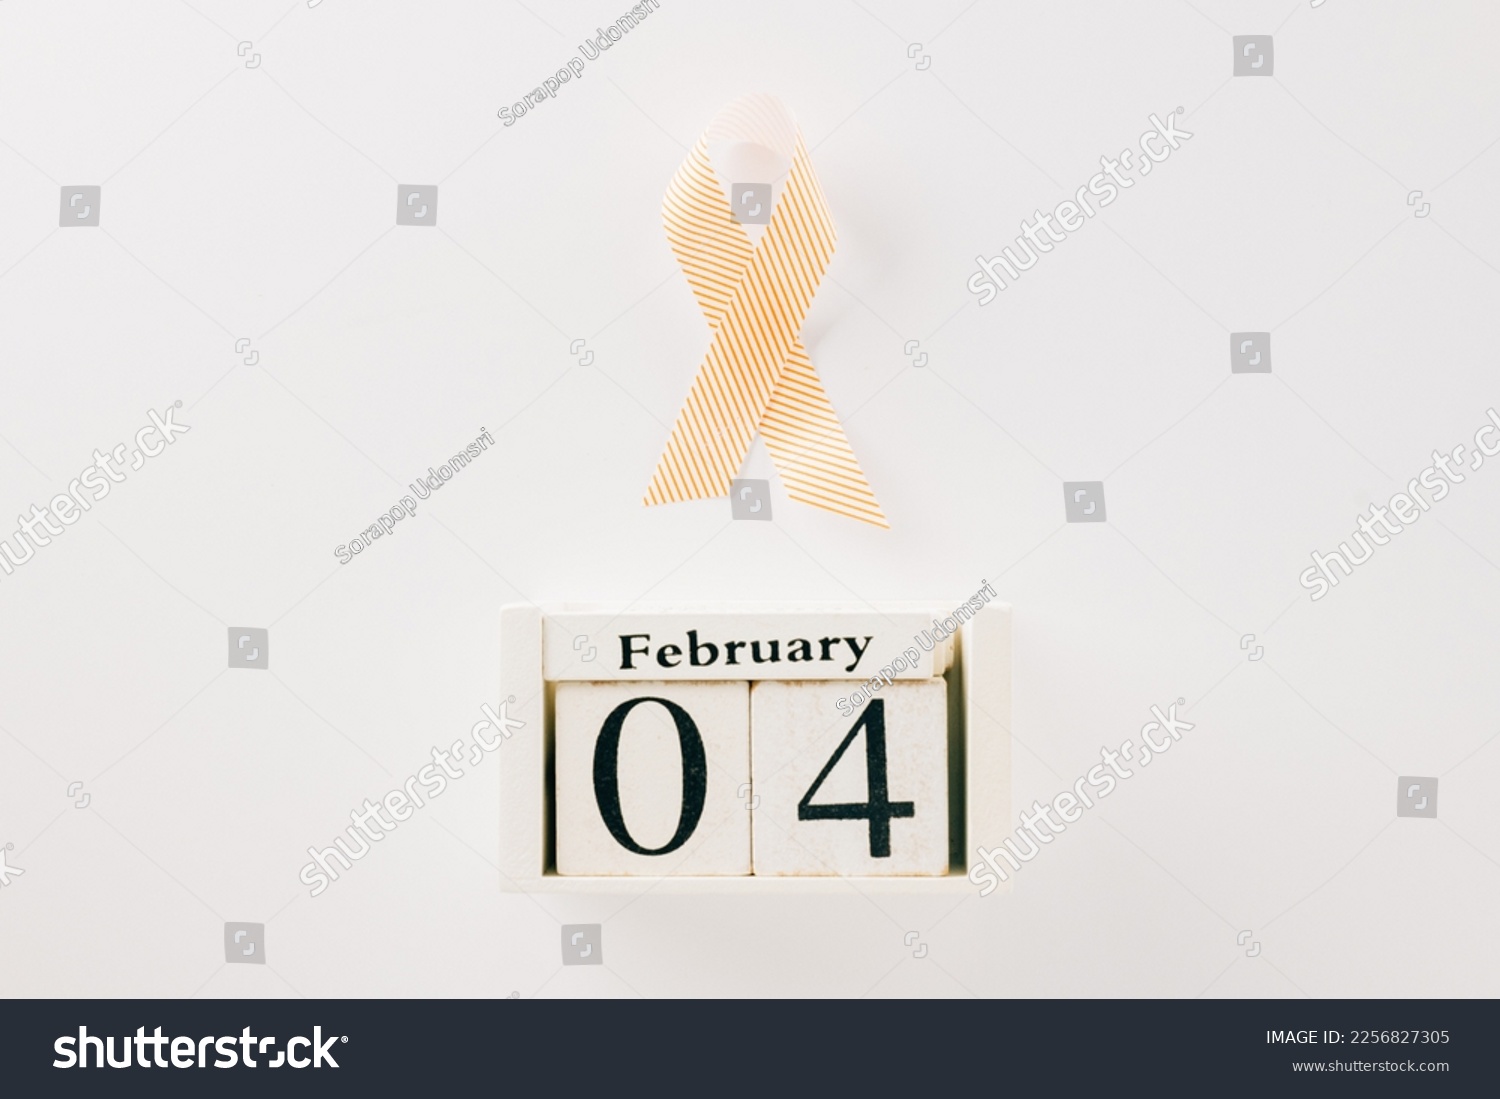 Pink awareness ribbon sign and Calender 4 February of World Cancer Day campaign isolated on white background with copy space, concept of medical and health care support #2256827305